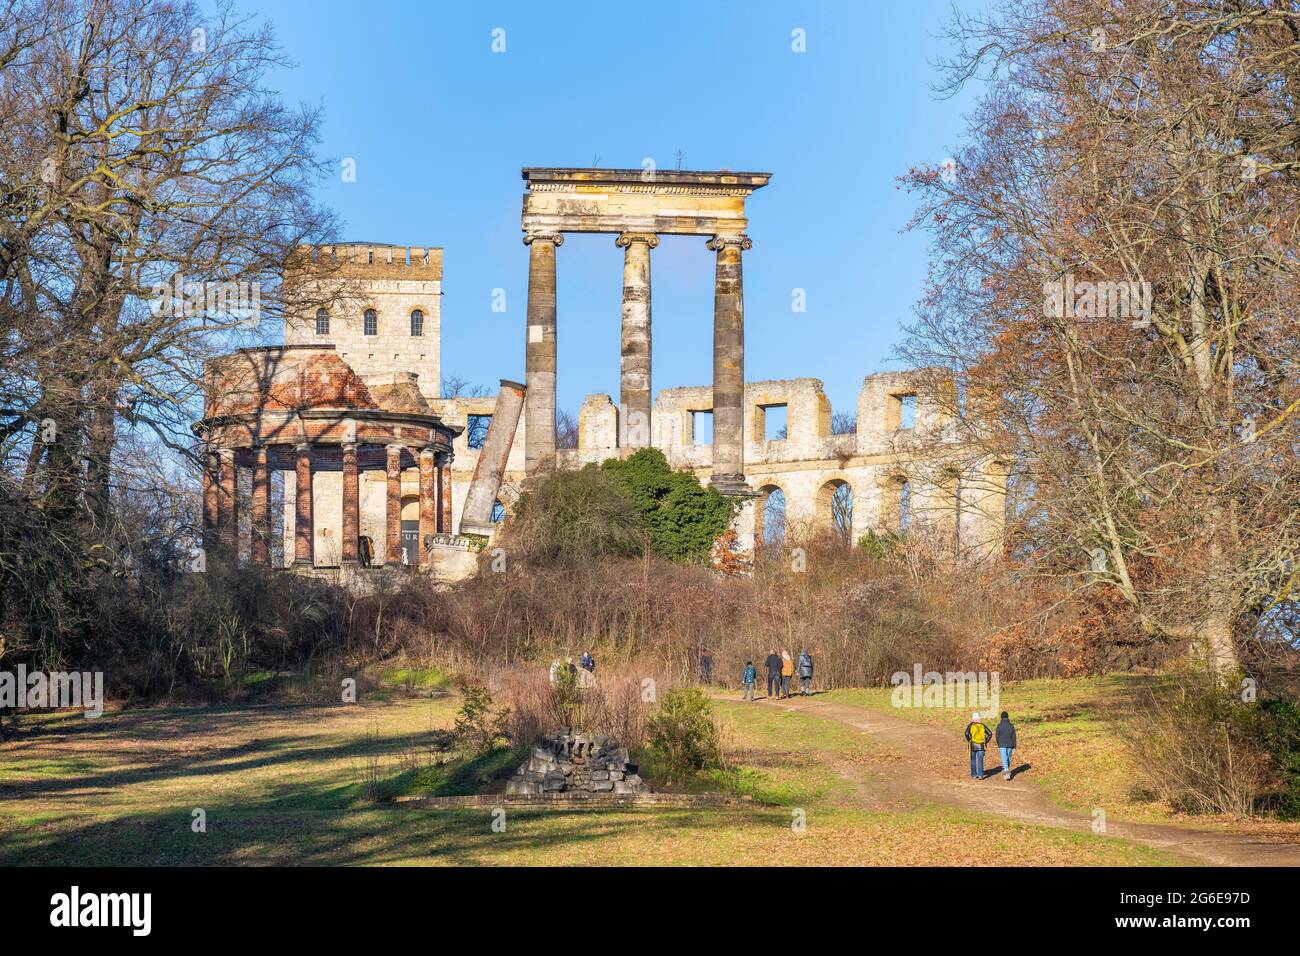 Artificial ruins and Norman Tower on Ruinenberg in winter, Potsdam, Brandenburg, Germany Stock Photo